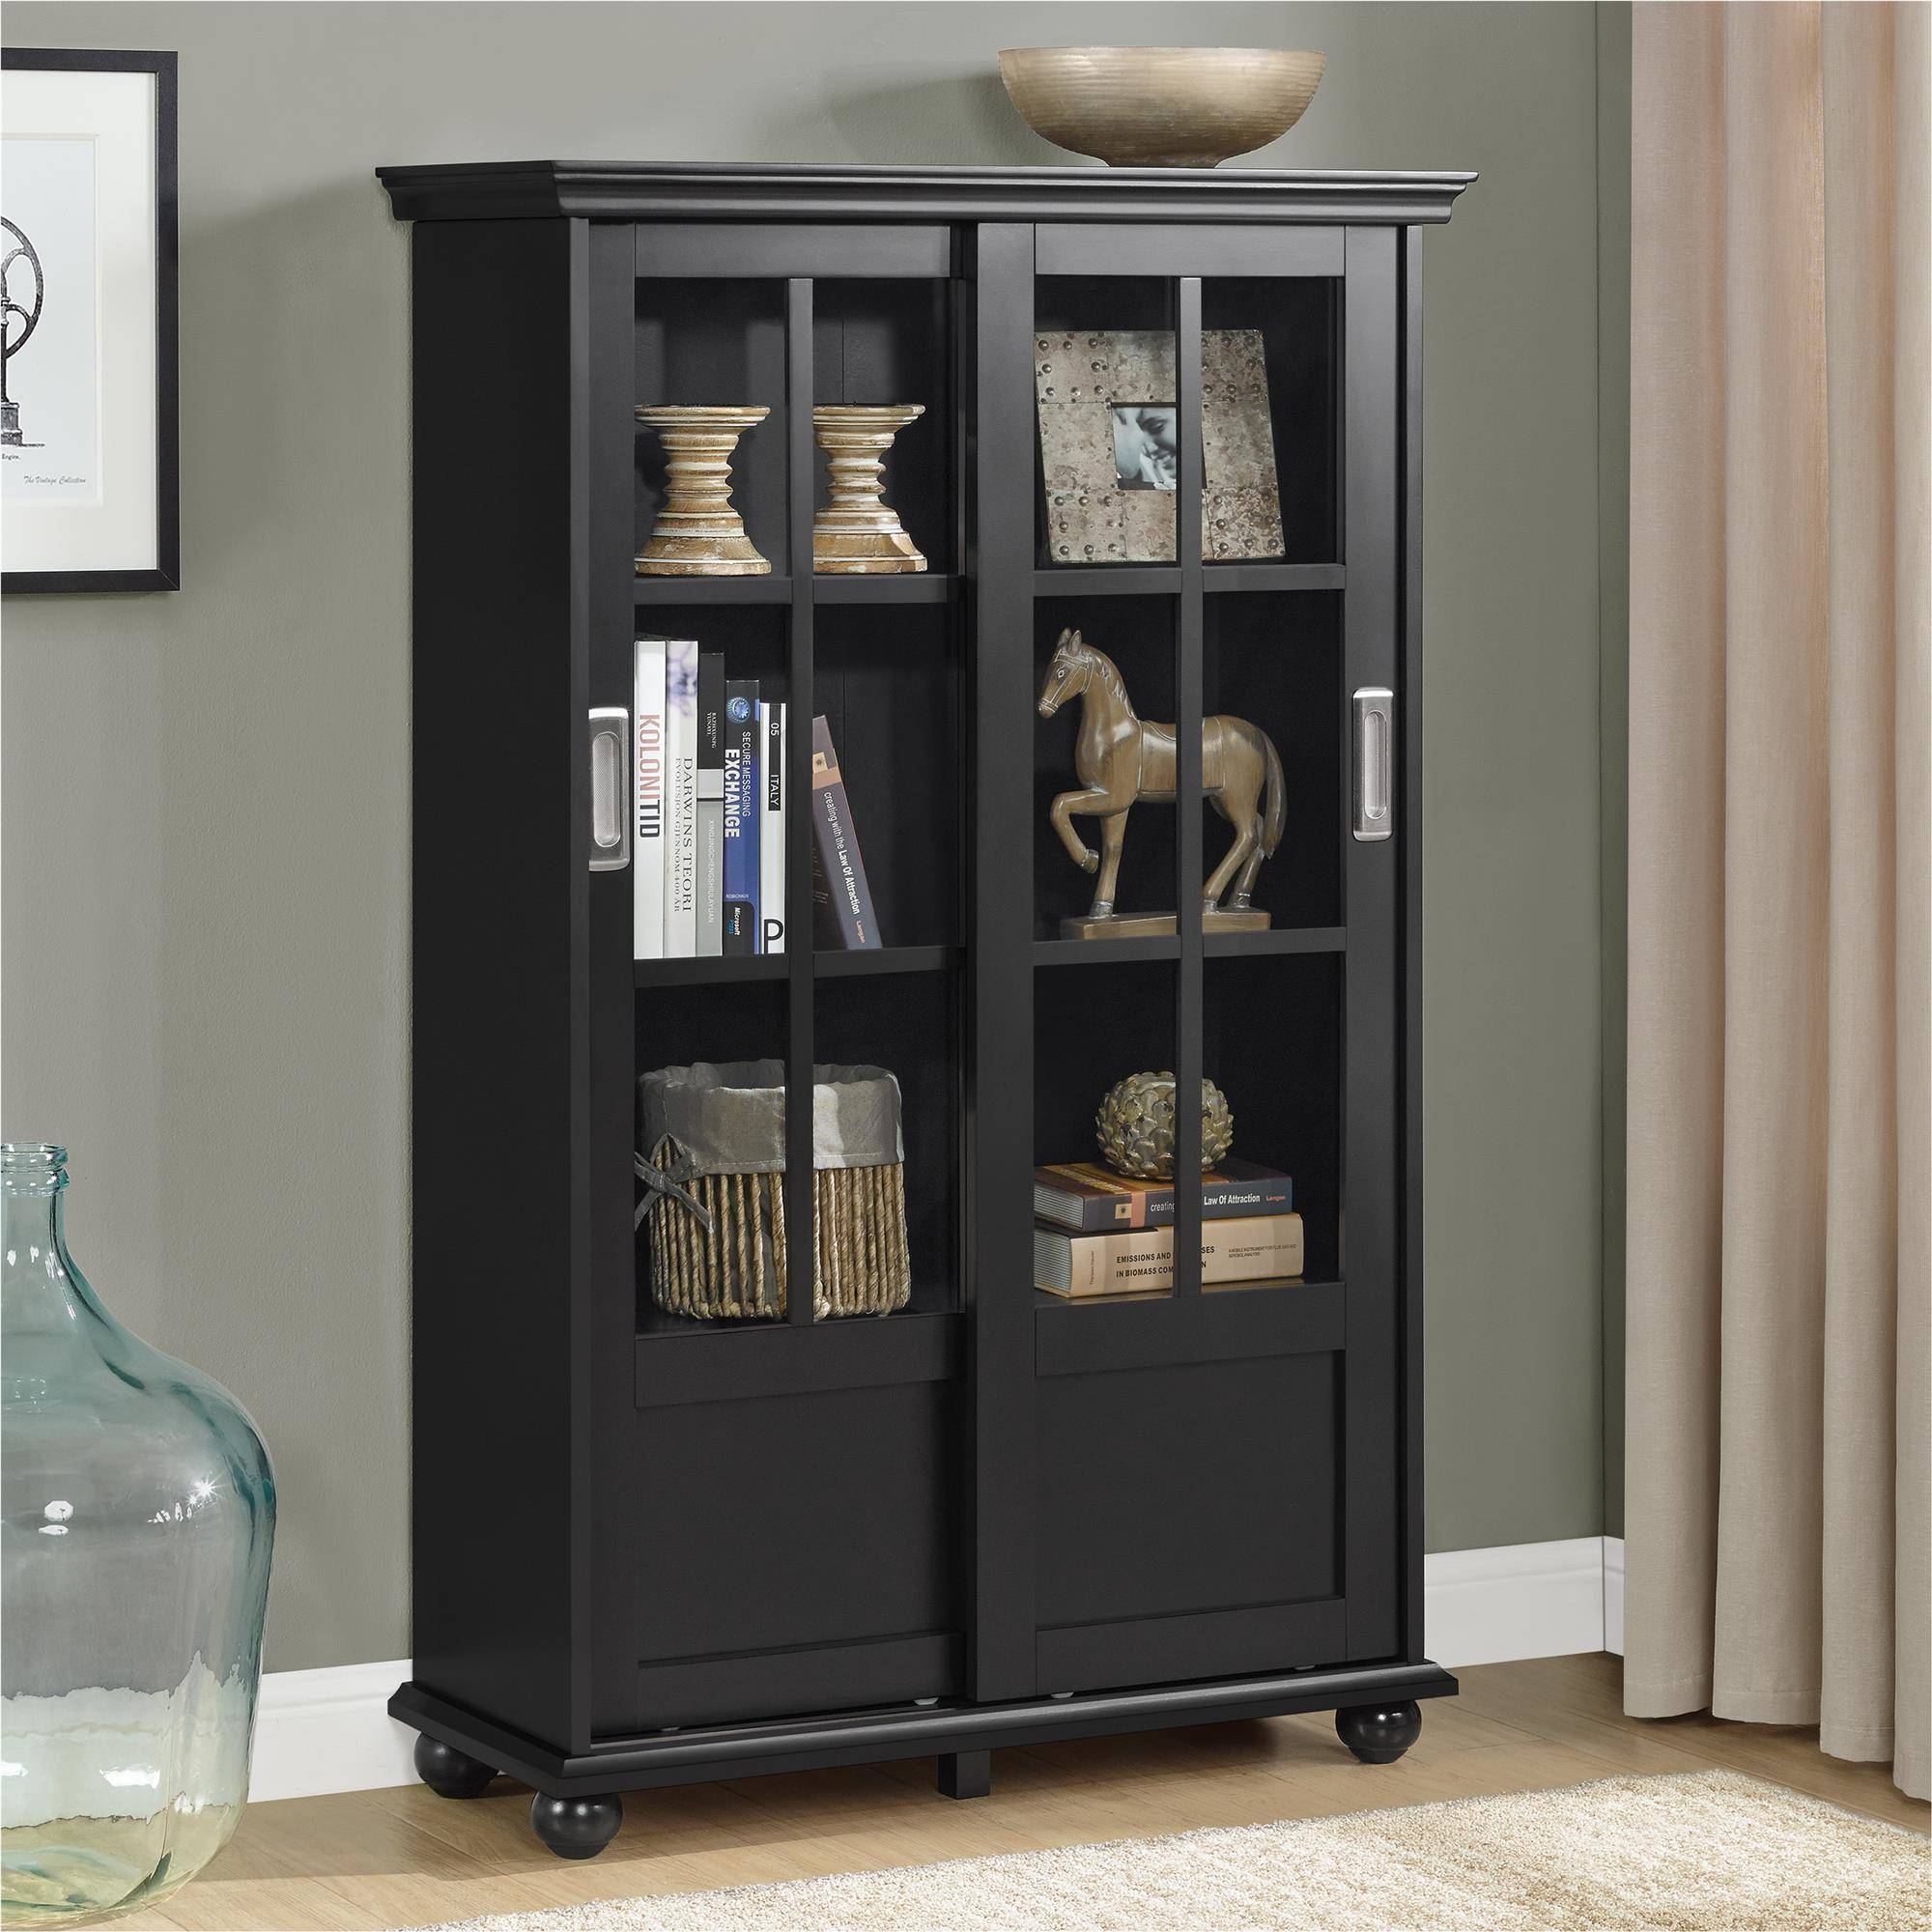 Bookcase With Glass Doors You Ll Love, Small Bookcase With Glass Doors Uk